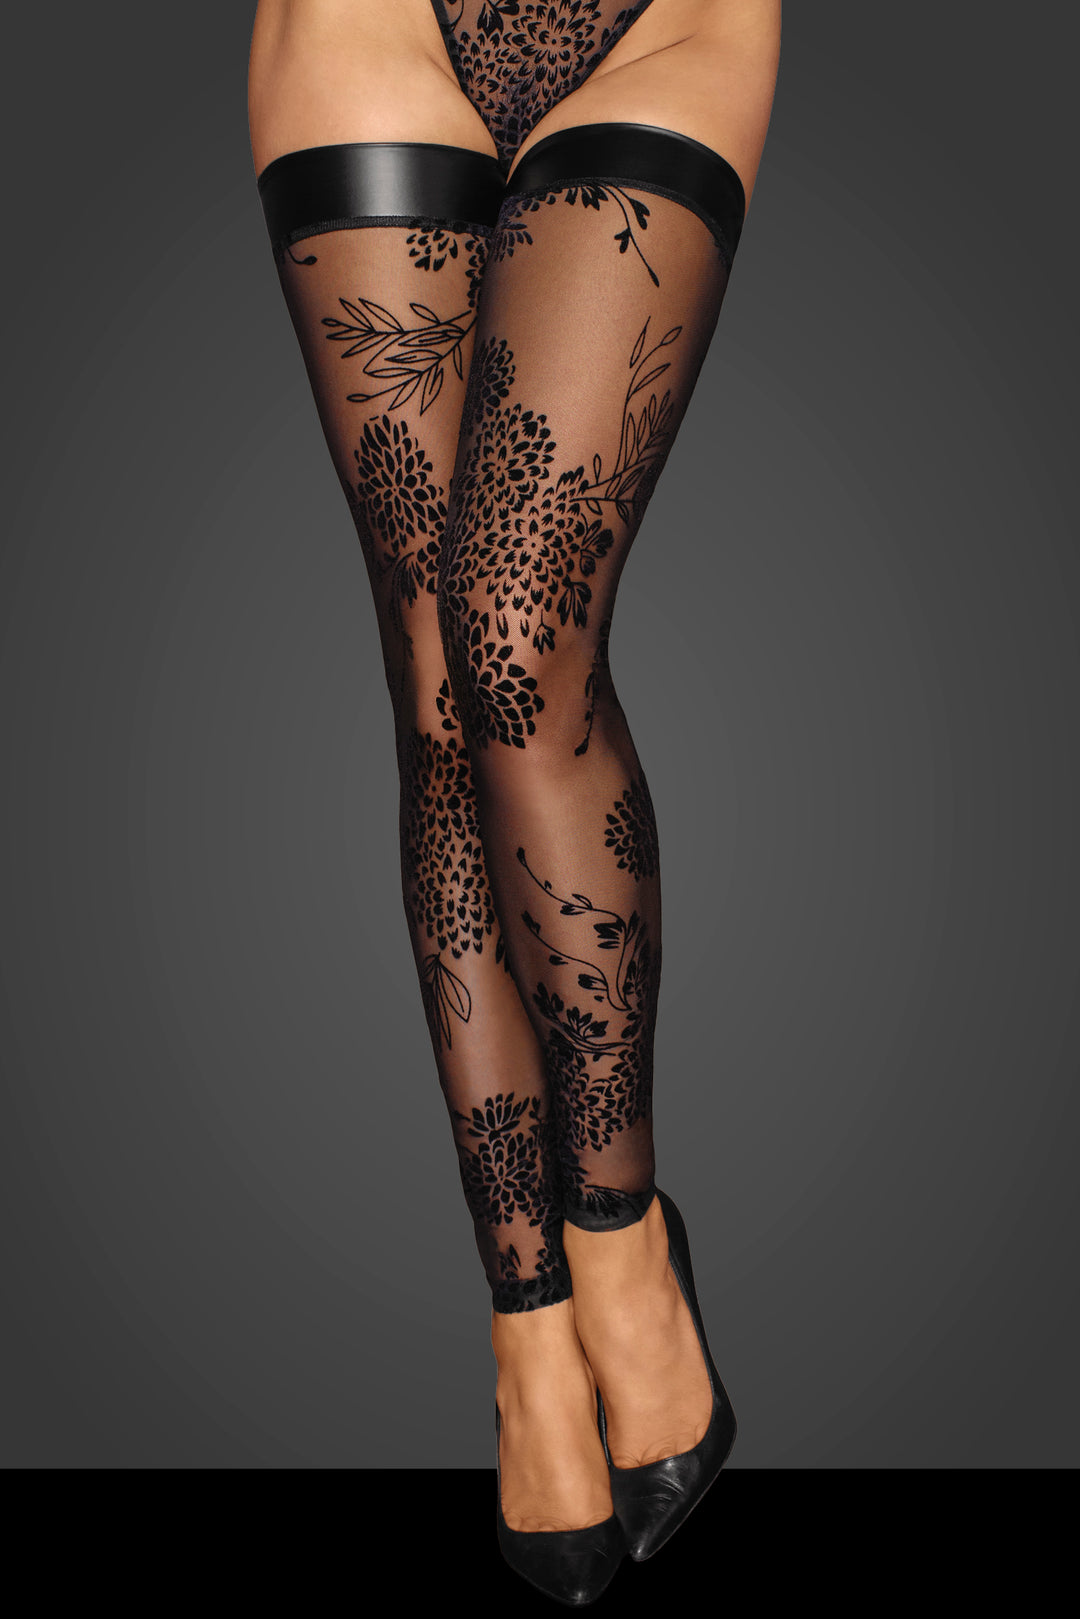 Tulle stockings with patterned flock embroidery and wetlook band at the top.